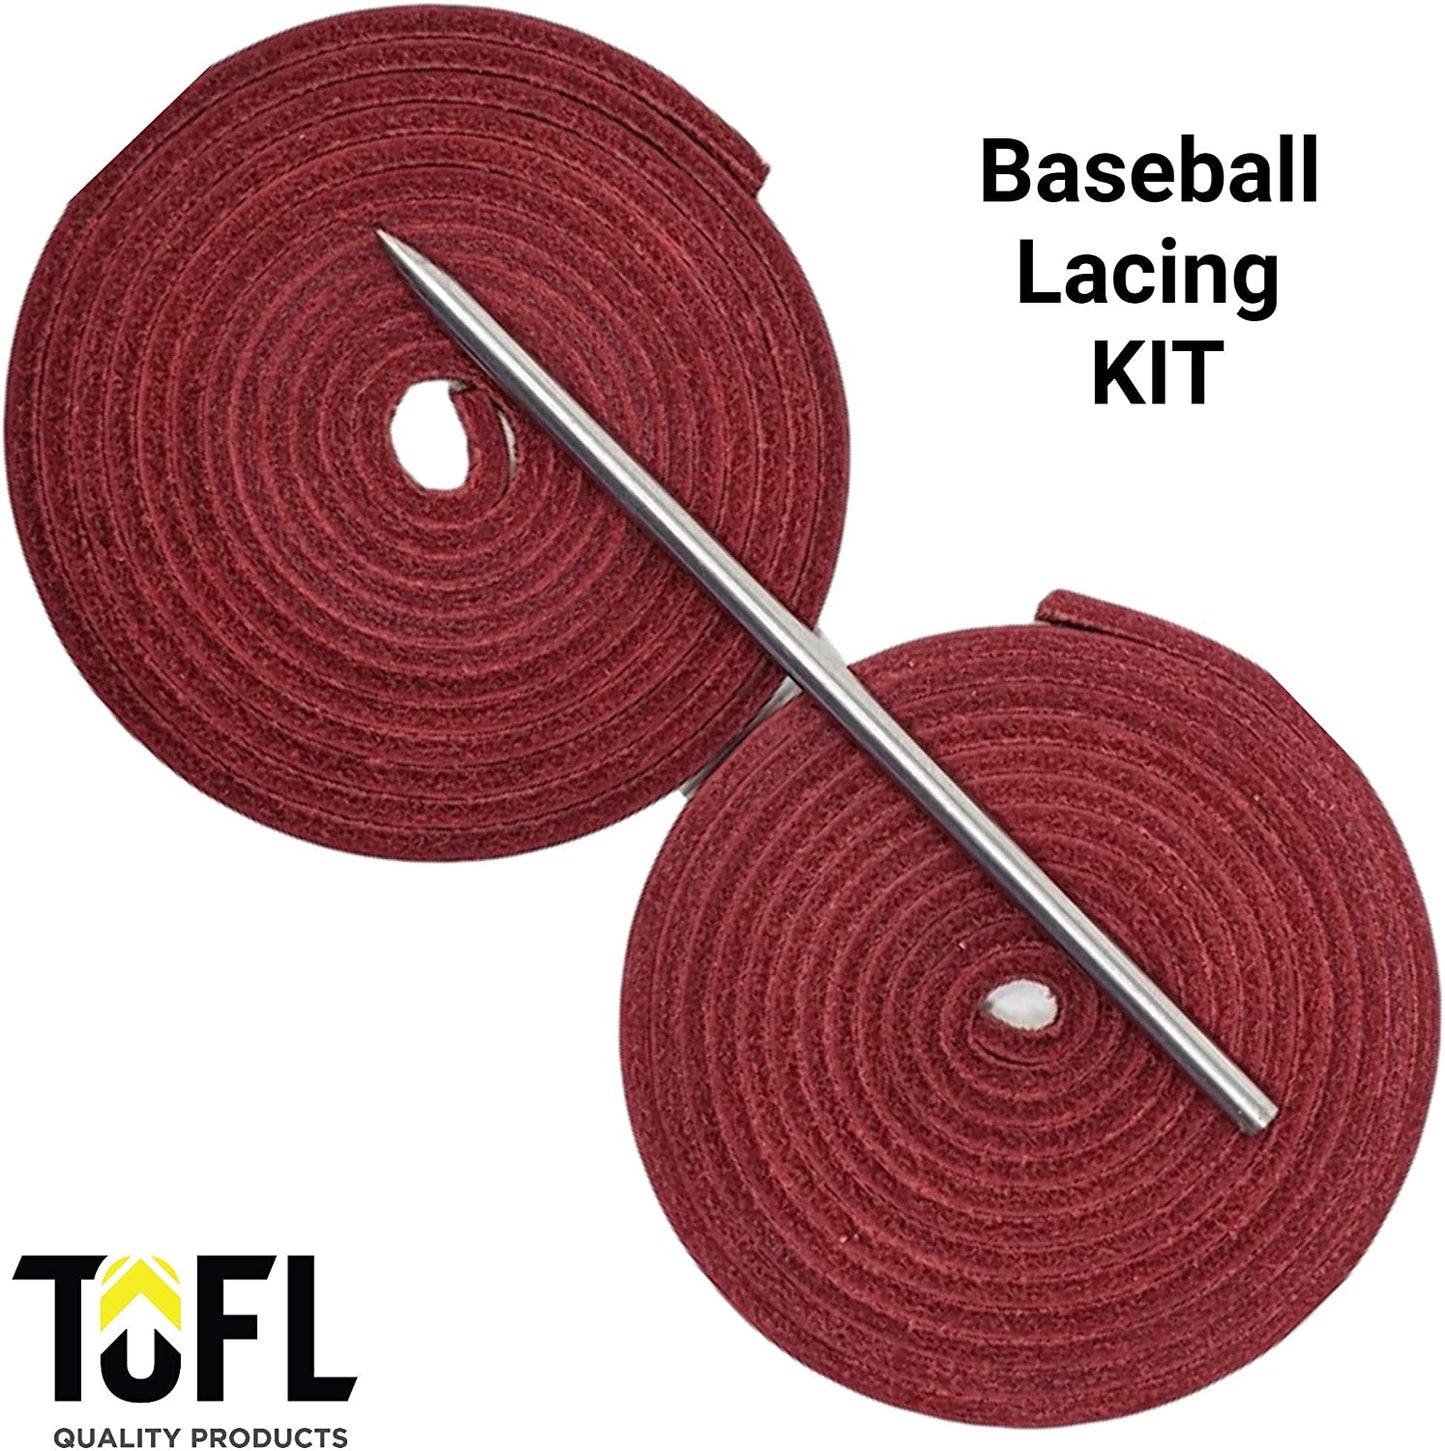 TOFL 6 Medium Brown Laces and a Lacing Needle to Repair You Baseball Glove